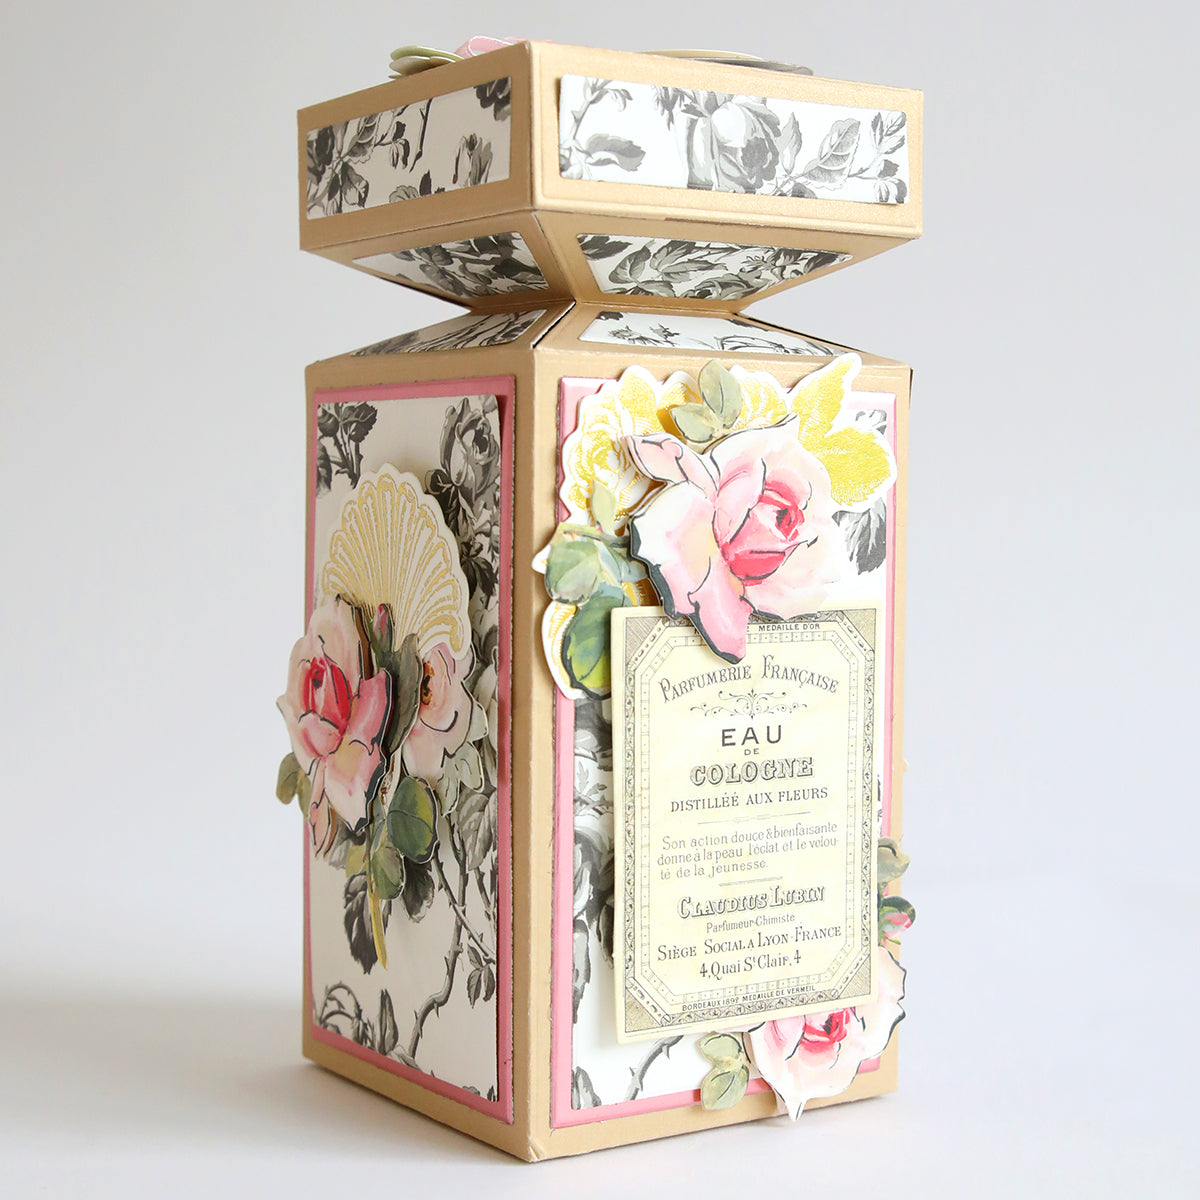 A gift-wrapped Anna Griffin Perfume Box adorned with roses and flowers.